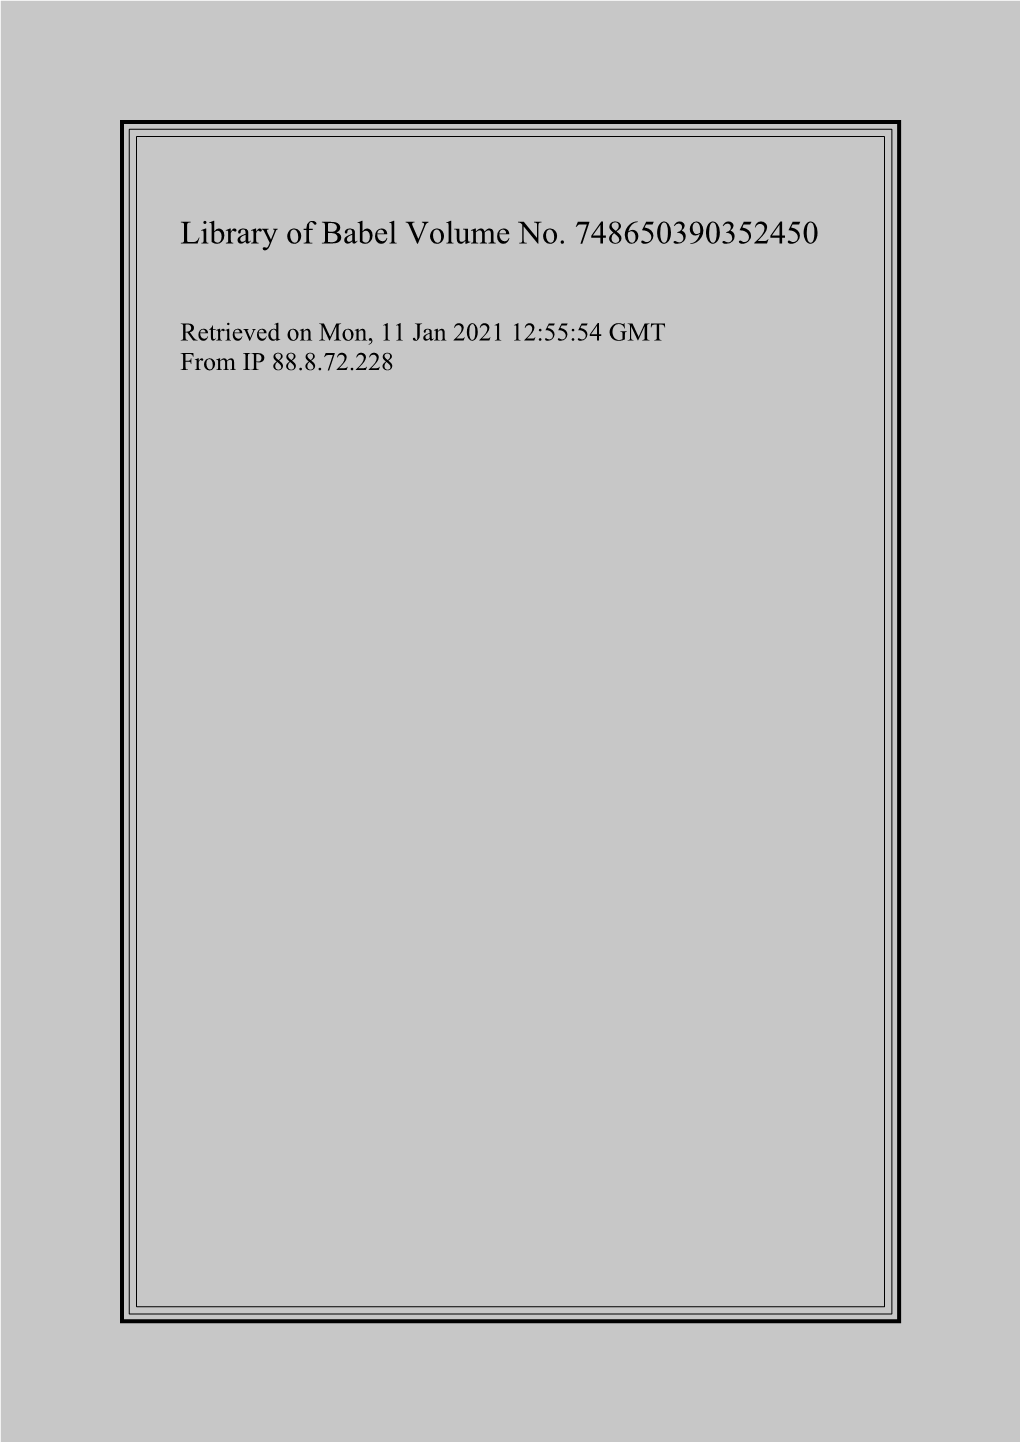 Library of Babel Volume #748650390352450